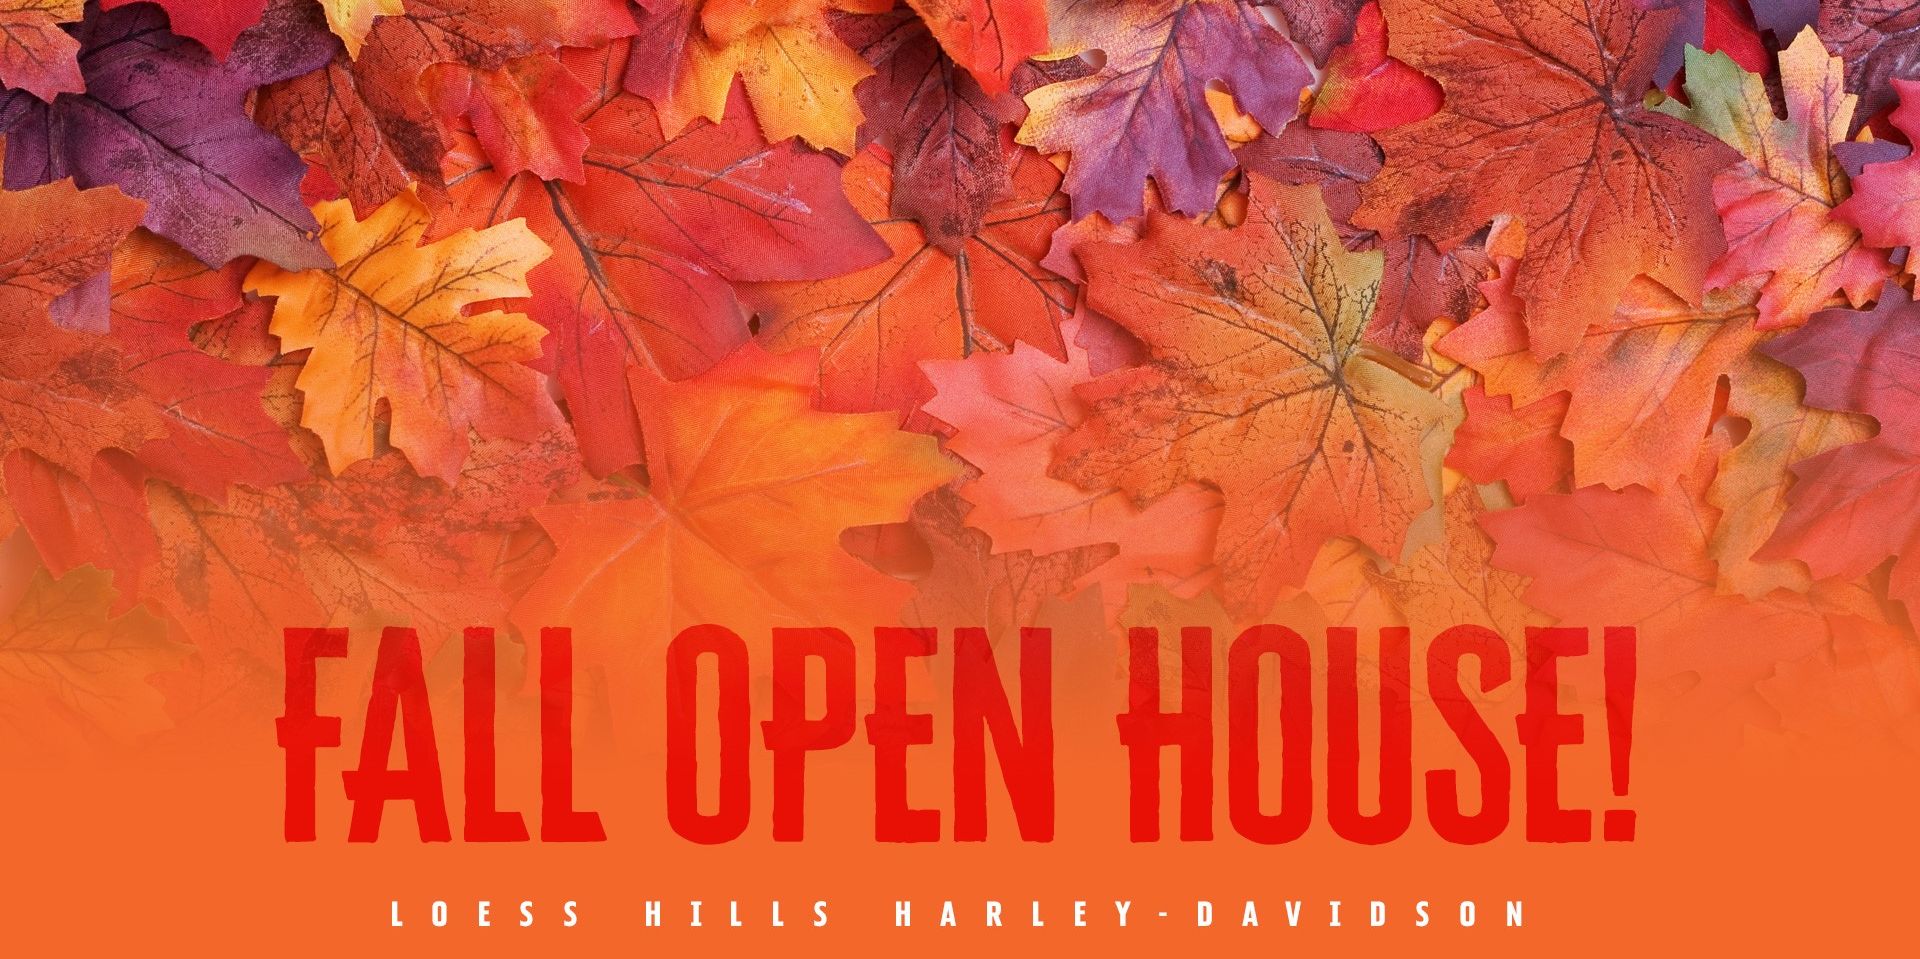 Fall Open House promotional image